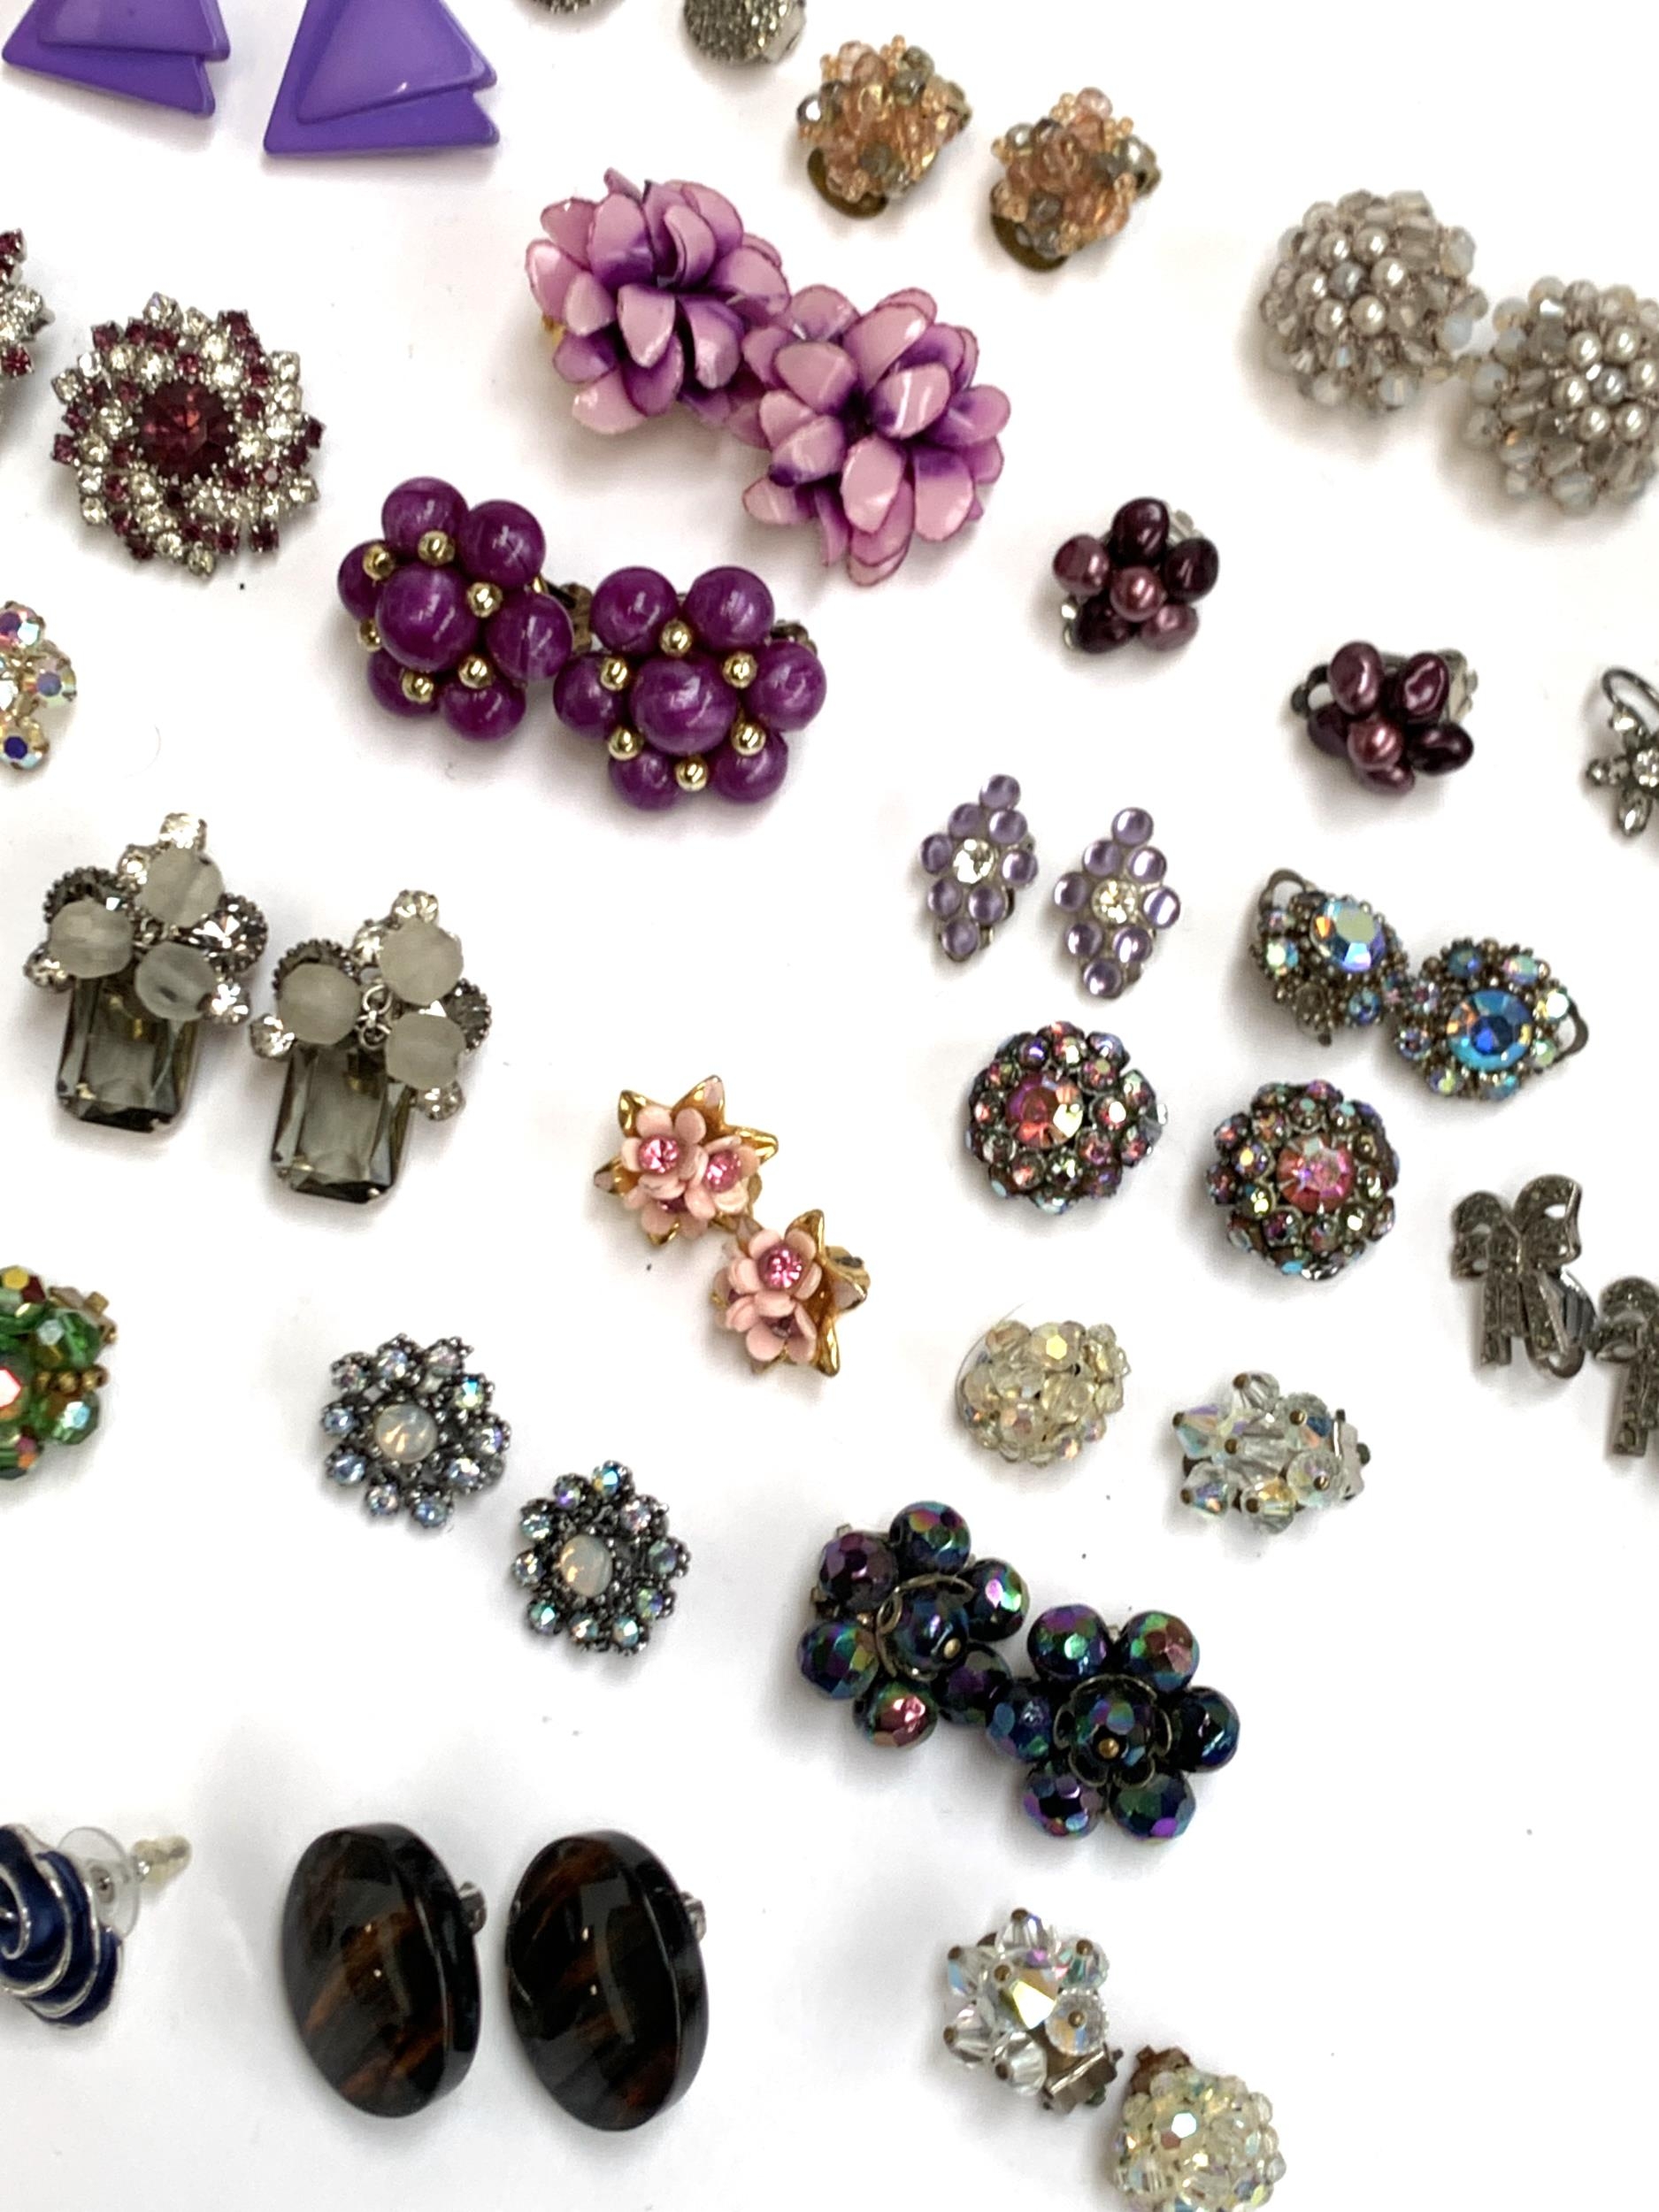 A quantity of costume clip on earrings, some purple and green tone, aurora borealis crystal etc - Image 4 of 4